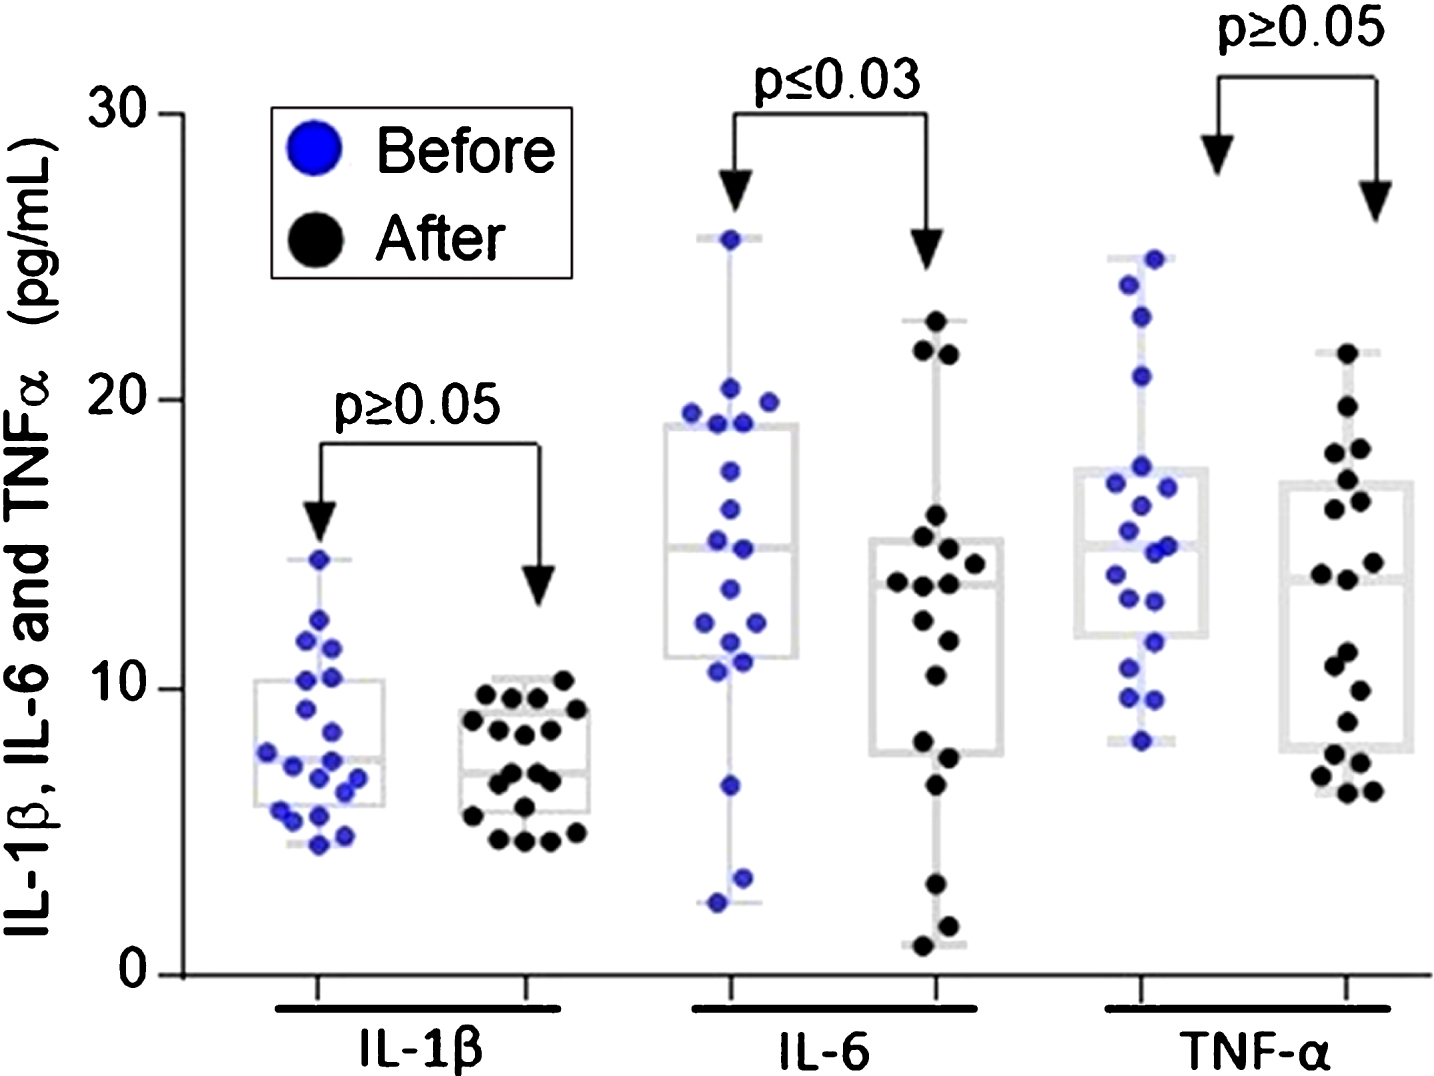 Plasma IL-1β, IL-6 and TNFα levels before and after intake of ABJ for 14 days in healthy participants with dietary factors associated with risk for CRC. The difference in the distribution of inflammatory cytokines was analyzed using the Wilcoxon signed rank test.